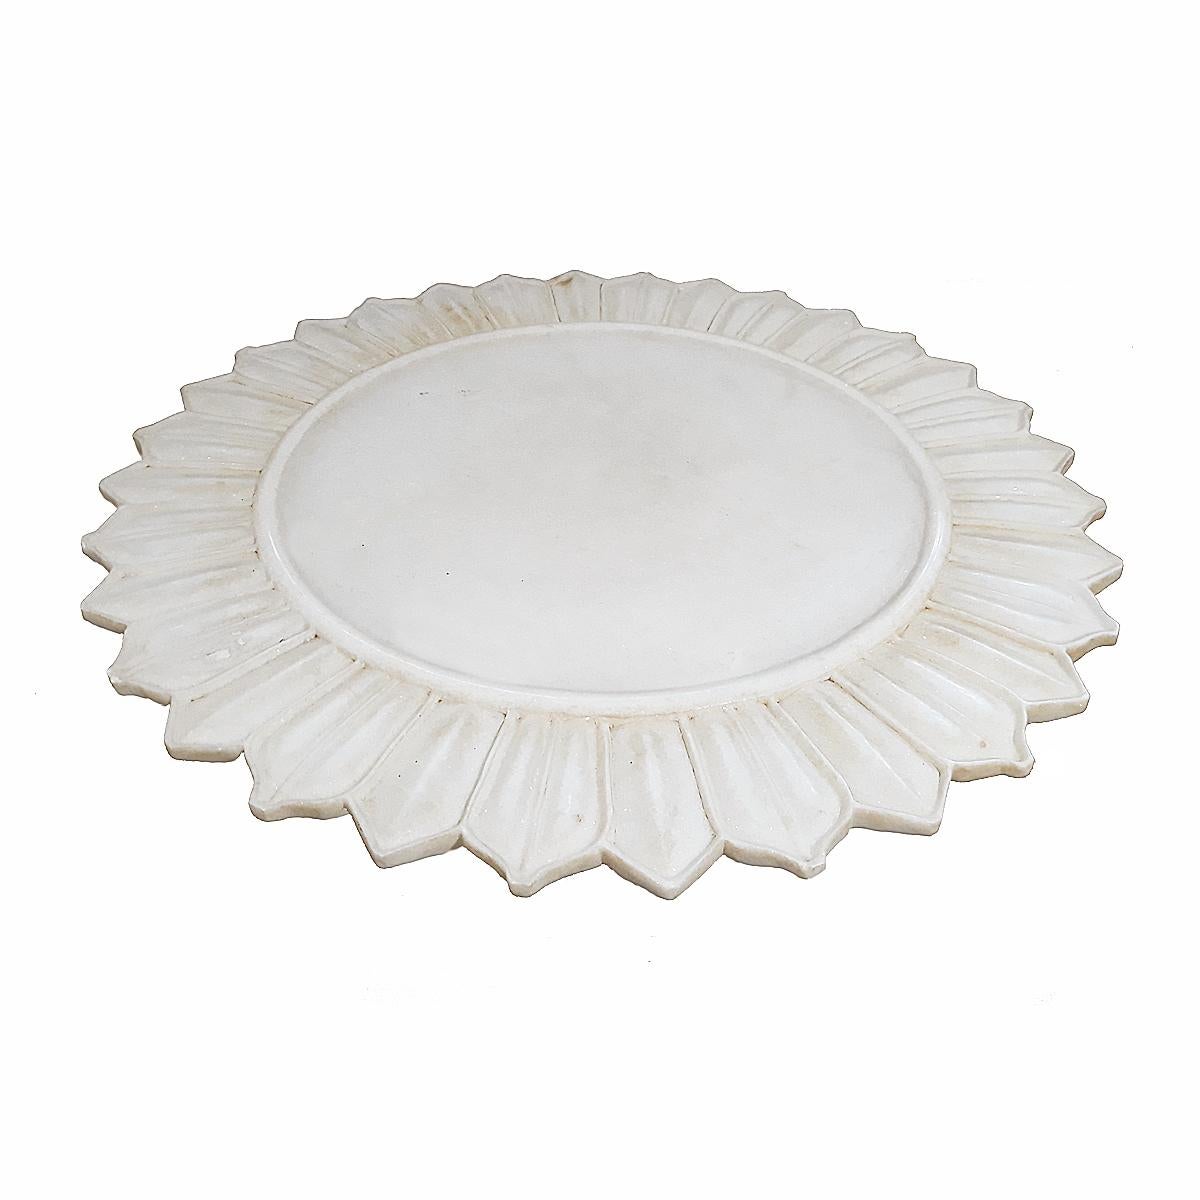 A hand-carved marble platter, server or charger from India.